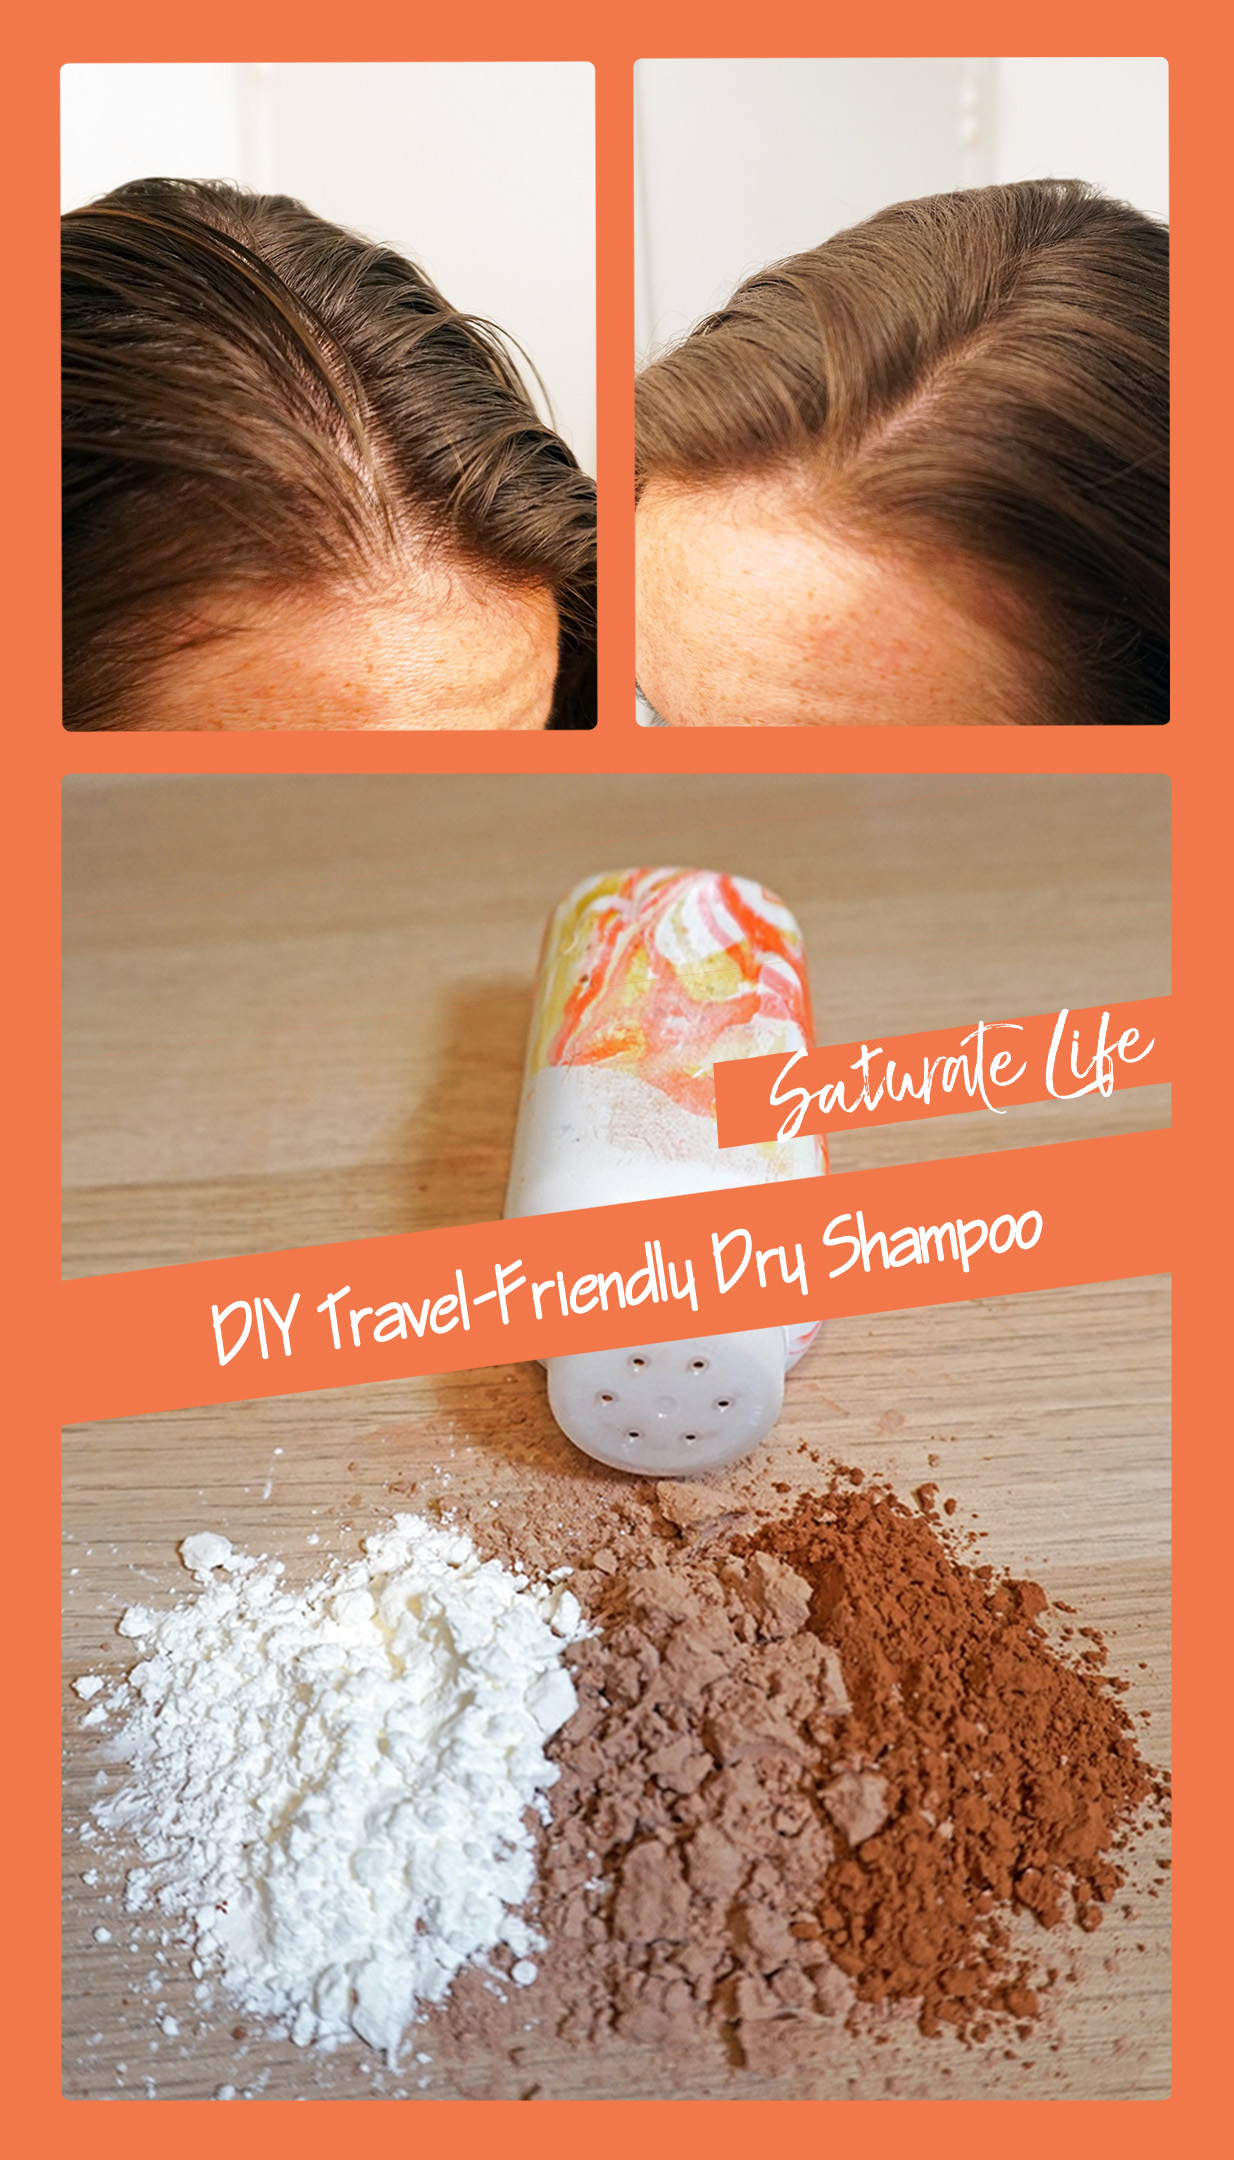 Travel Friendly DIY Dry Shampoo for Light and Dark Hair - Saturate Life